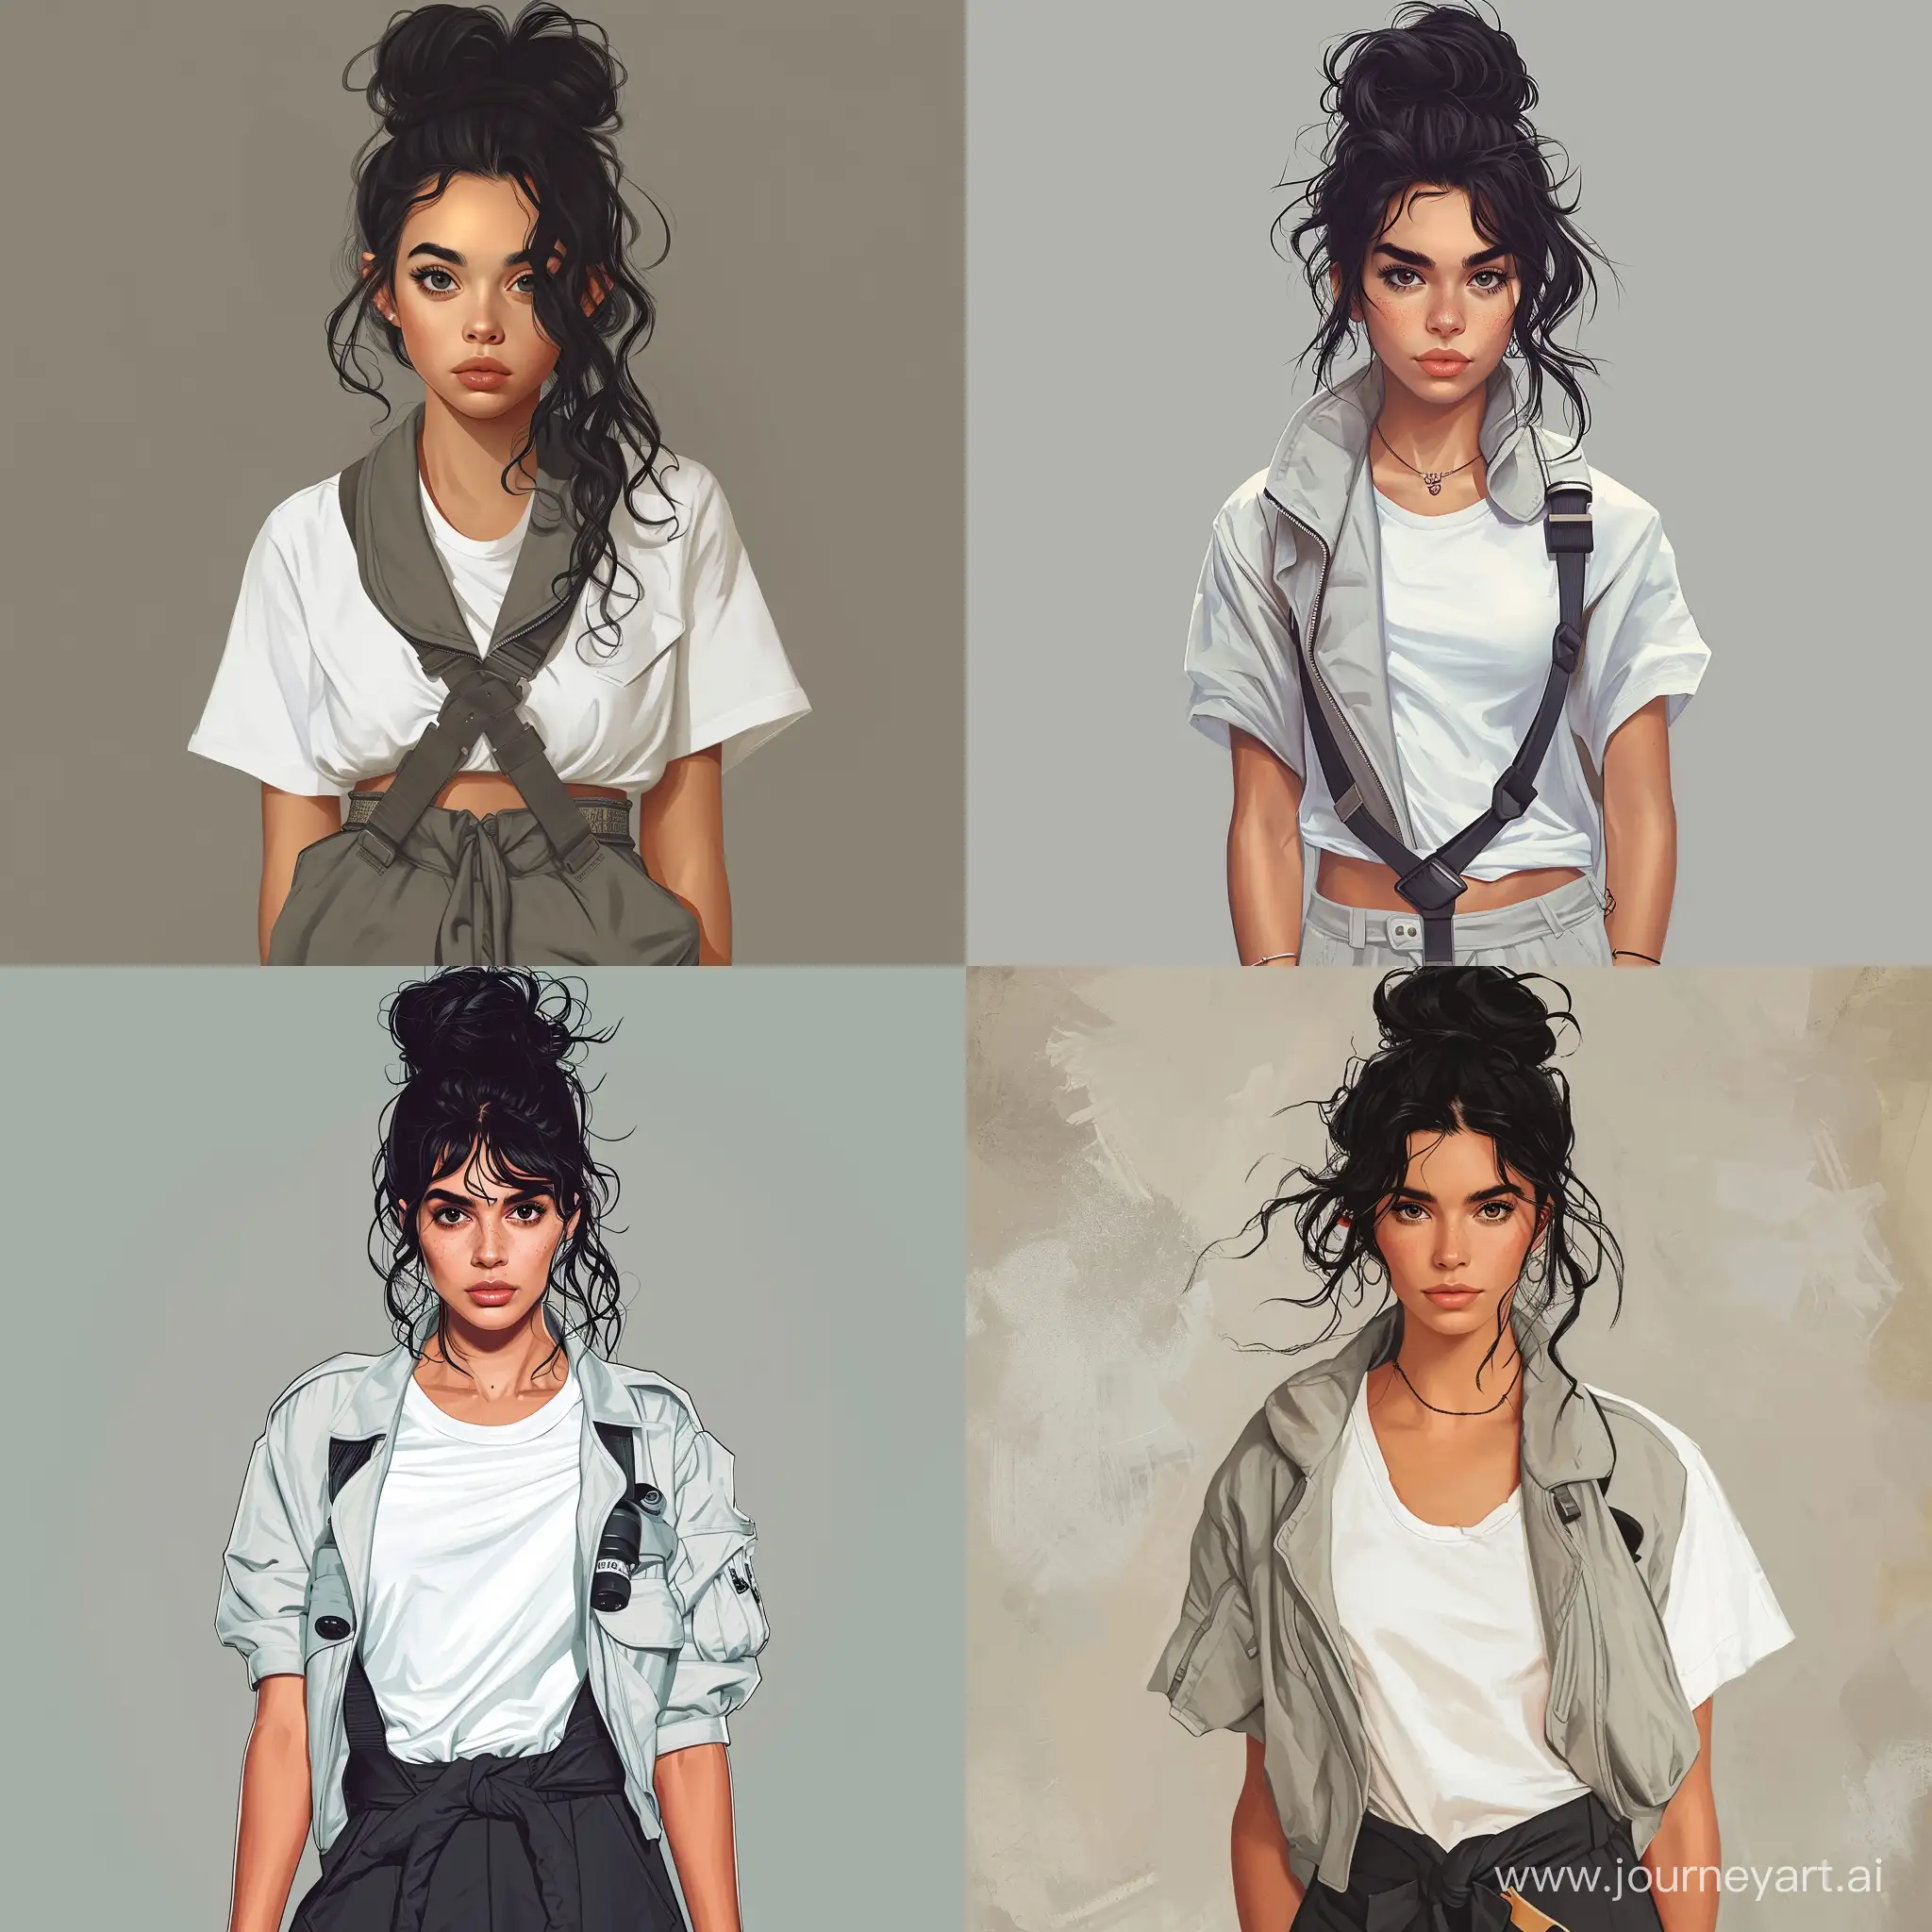 70th dark fantasy art, illustration of the young nice looking woman with black wavy hair gathered into a bundle. She is wearing white T-shirt and pilot suit, which upper part is tied over her waist. - ar 9:16